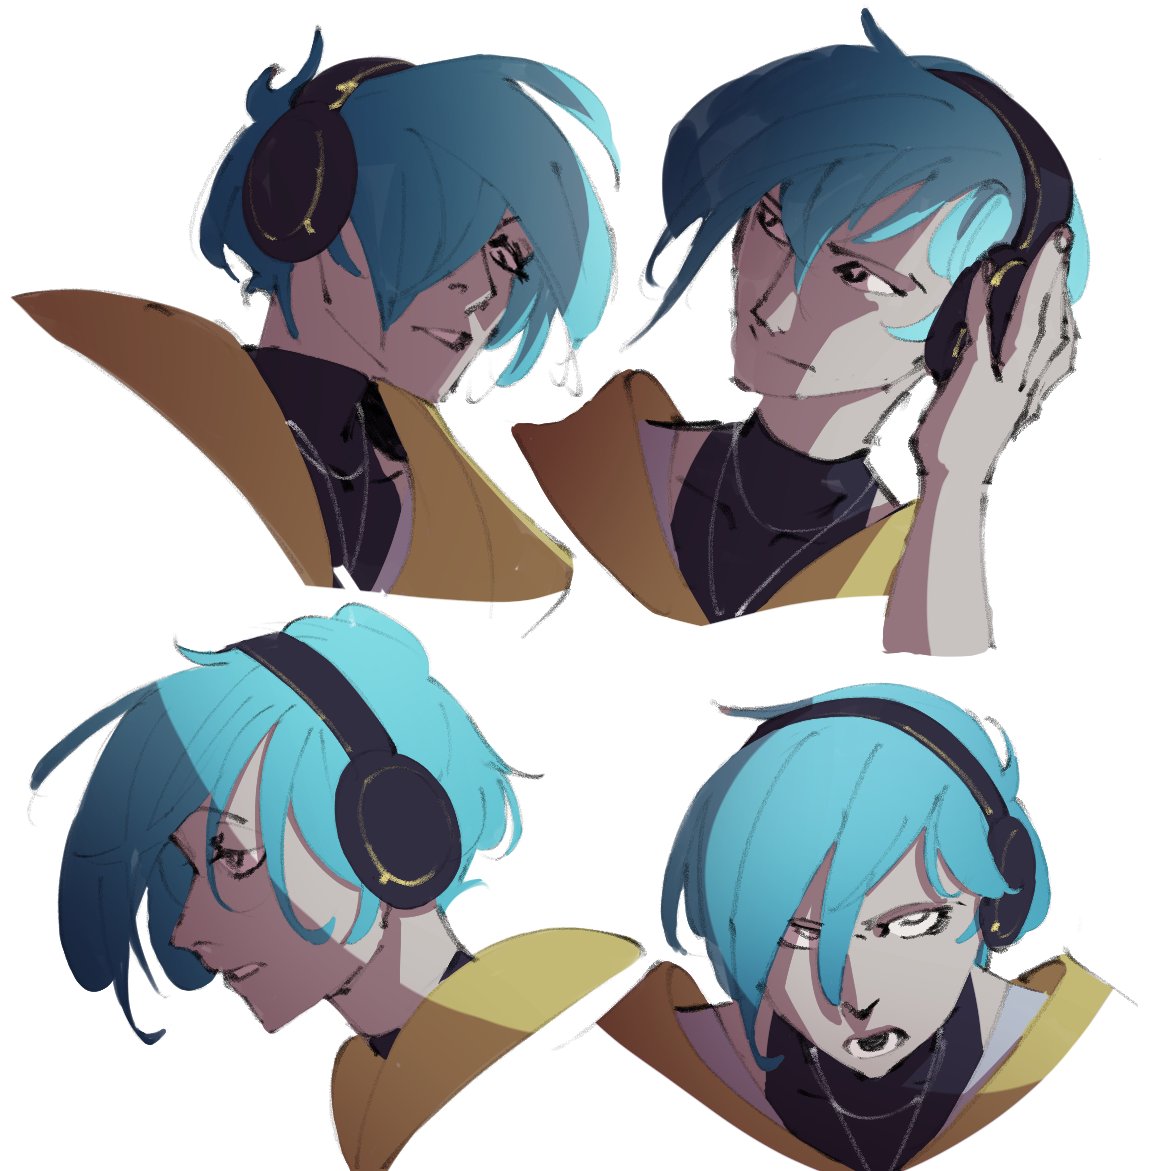 Heartsteel Aphelios expressions 🌙 I'm approaching 1.5 million mastery on the moon cake, so I think it's about time I drew him again! #heartsteelfanart #Aphelios